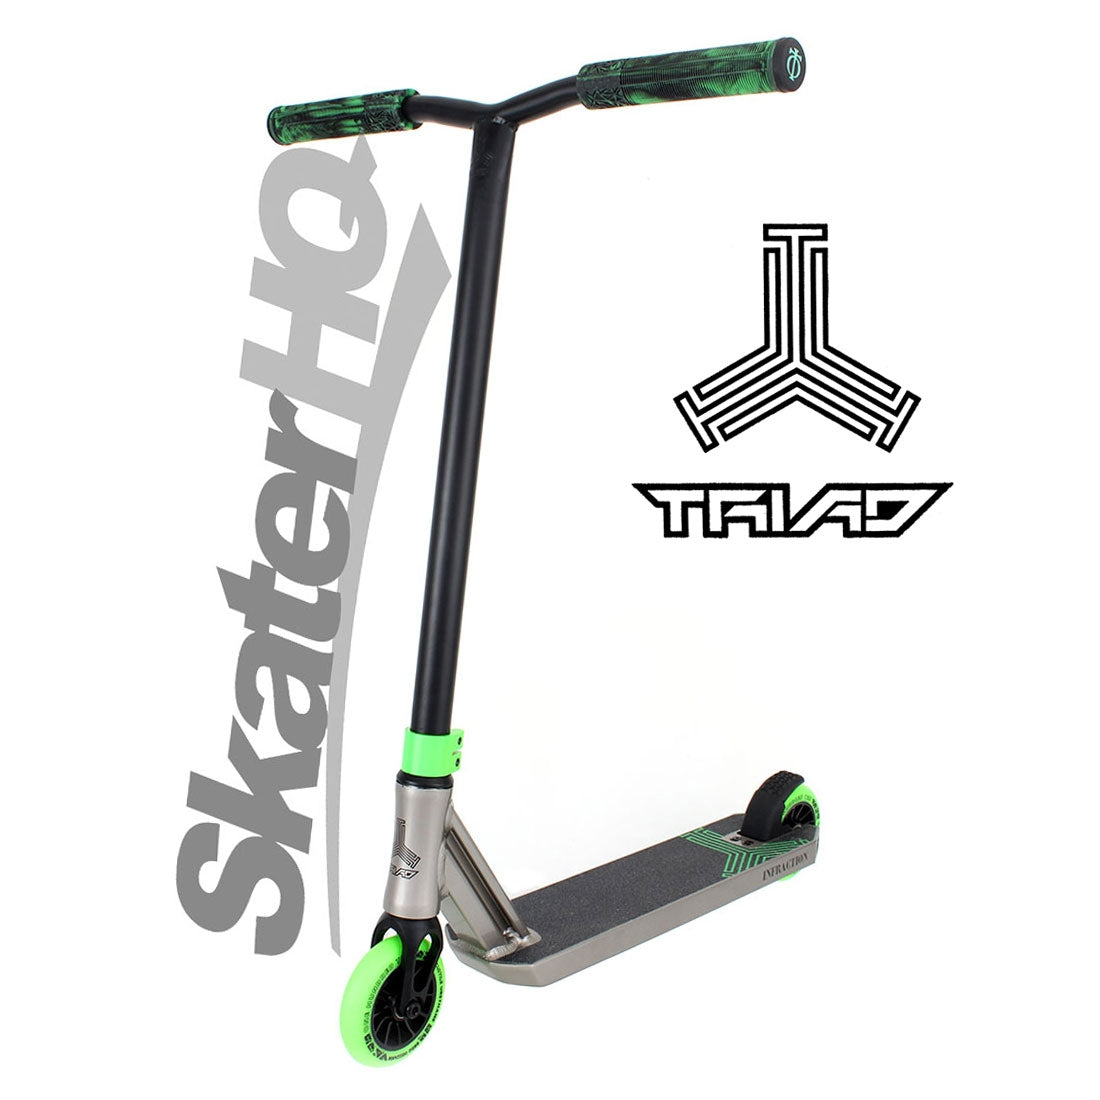 Triad Infraction - Ano Titanium/Green Scooter Completes Trick